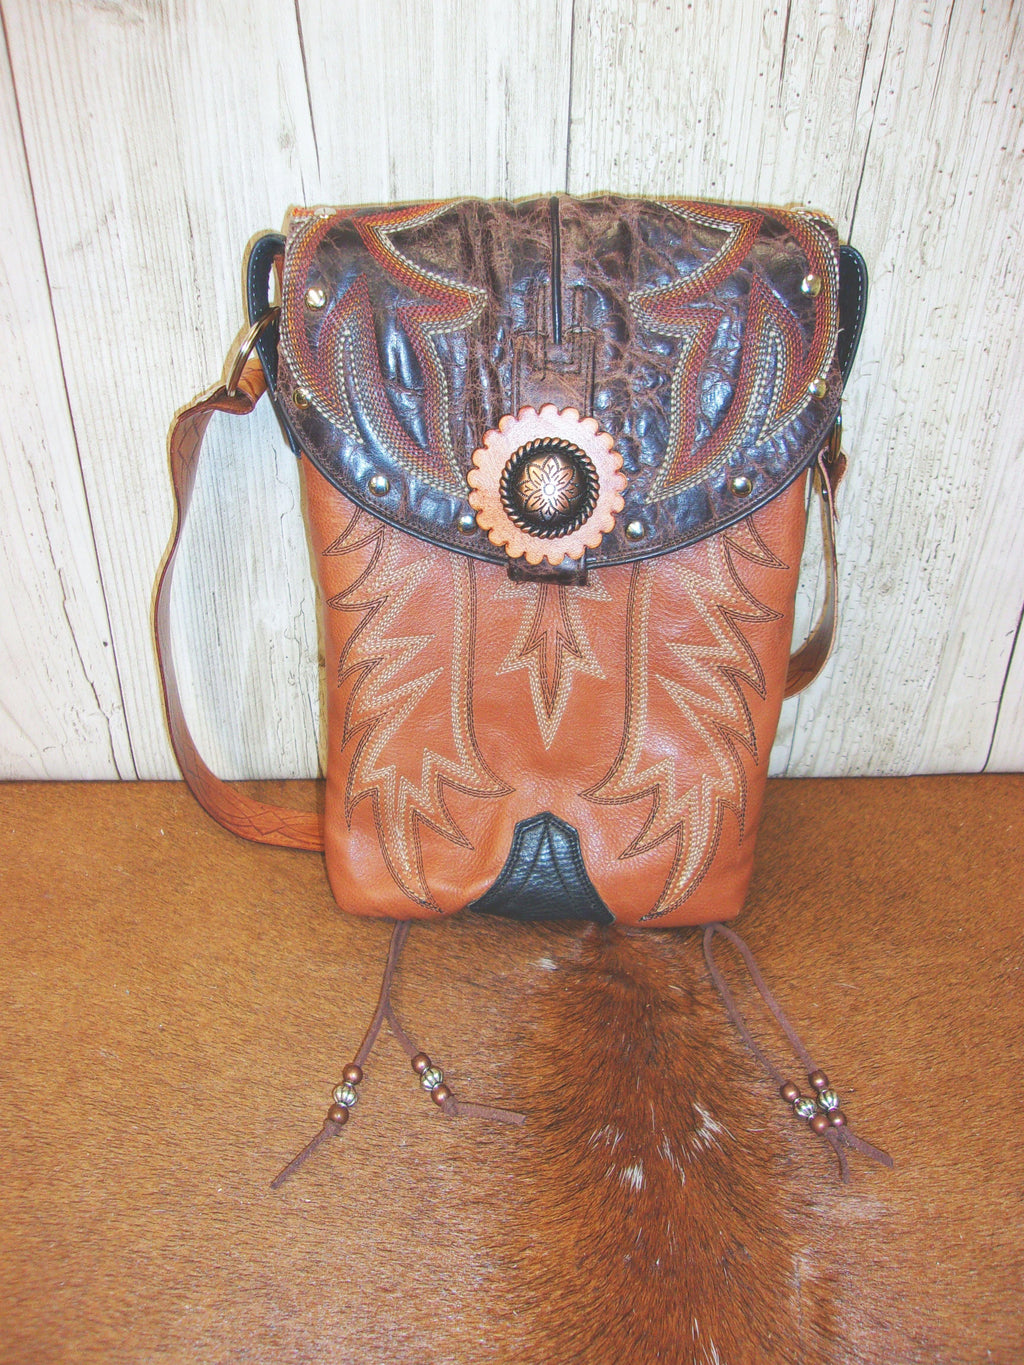 Cowboy Boot Concealed Carry Purse - Crossbody Conceal Carry Purse CB158 cowboy boot purses, western fringe purse, handmade leather purses, boot purse, handmade western purse, custom leather handbags Chris Thompson Bags